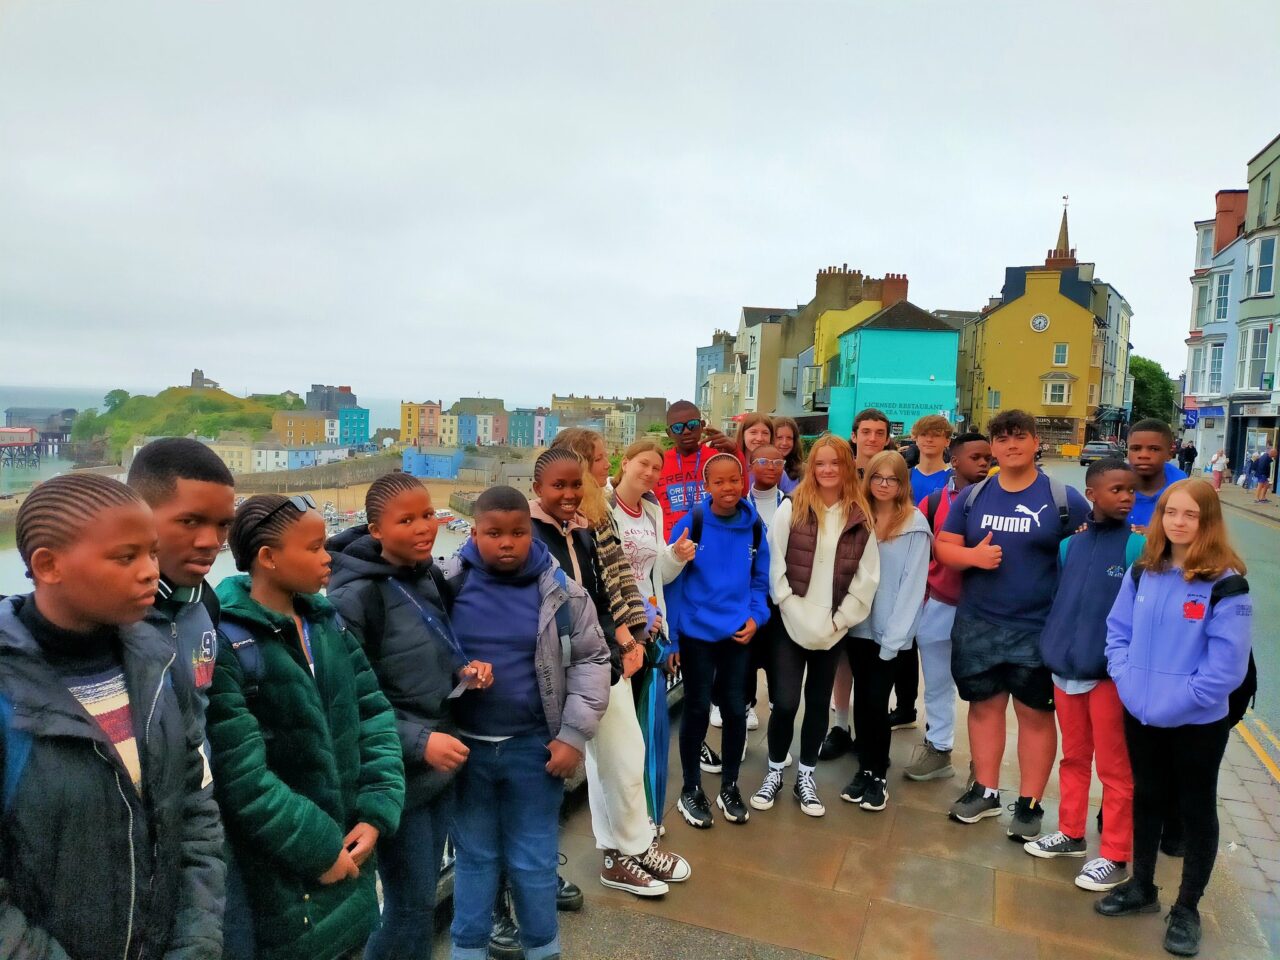 A group of teenagers standing in front of a row of colourful houses in a seaside town.